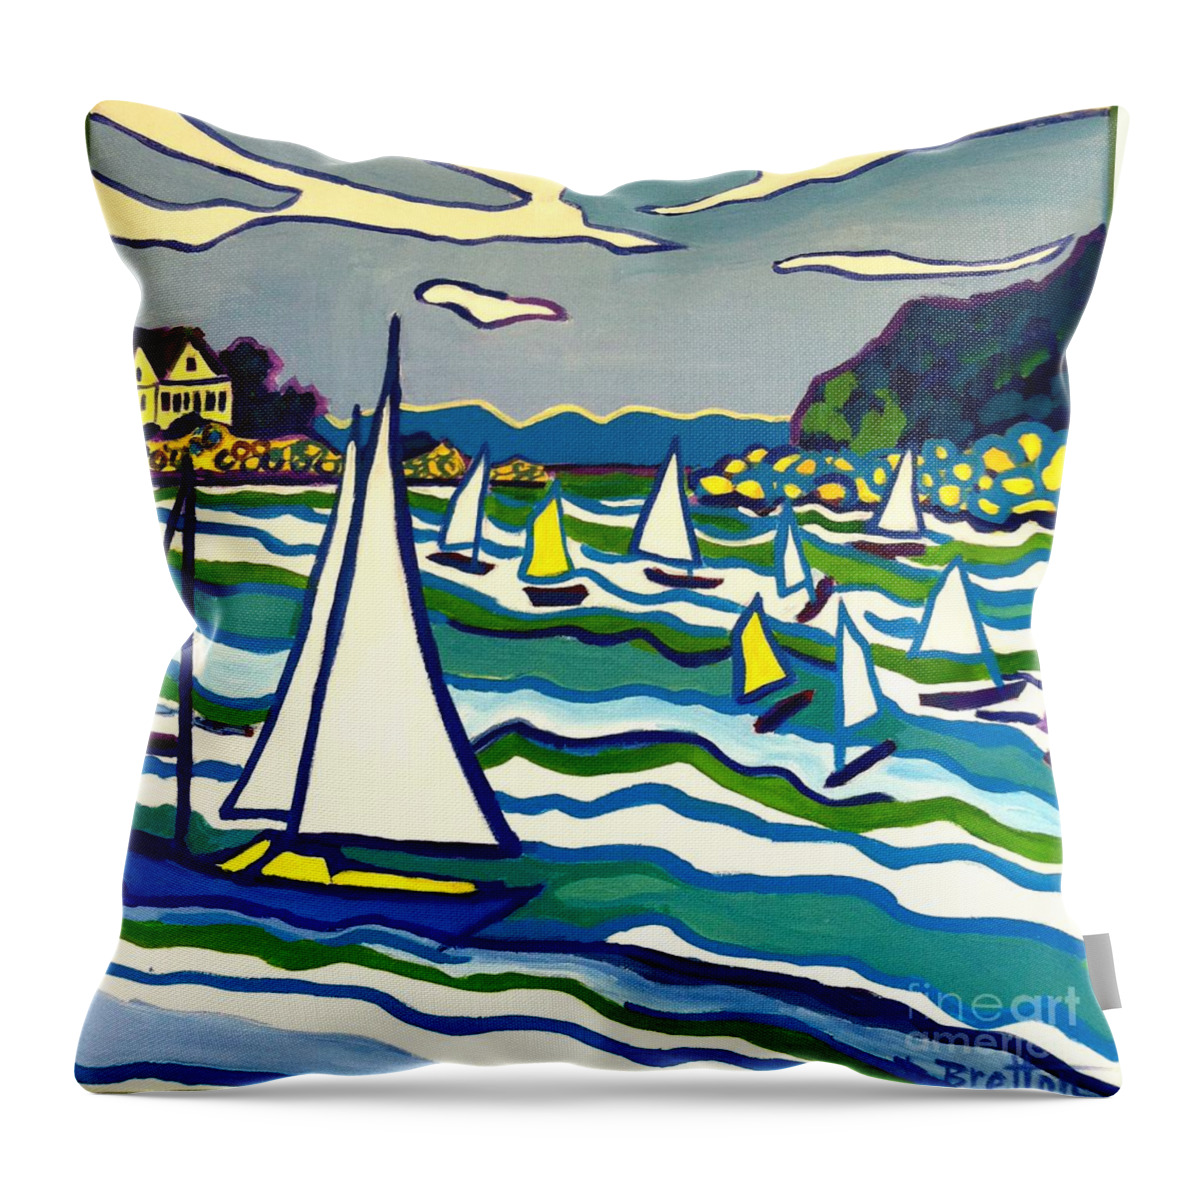 Landscape Throw Pillow featuring the painting Sailing School Manchester by-the-sea by Debra Bretton Robinson